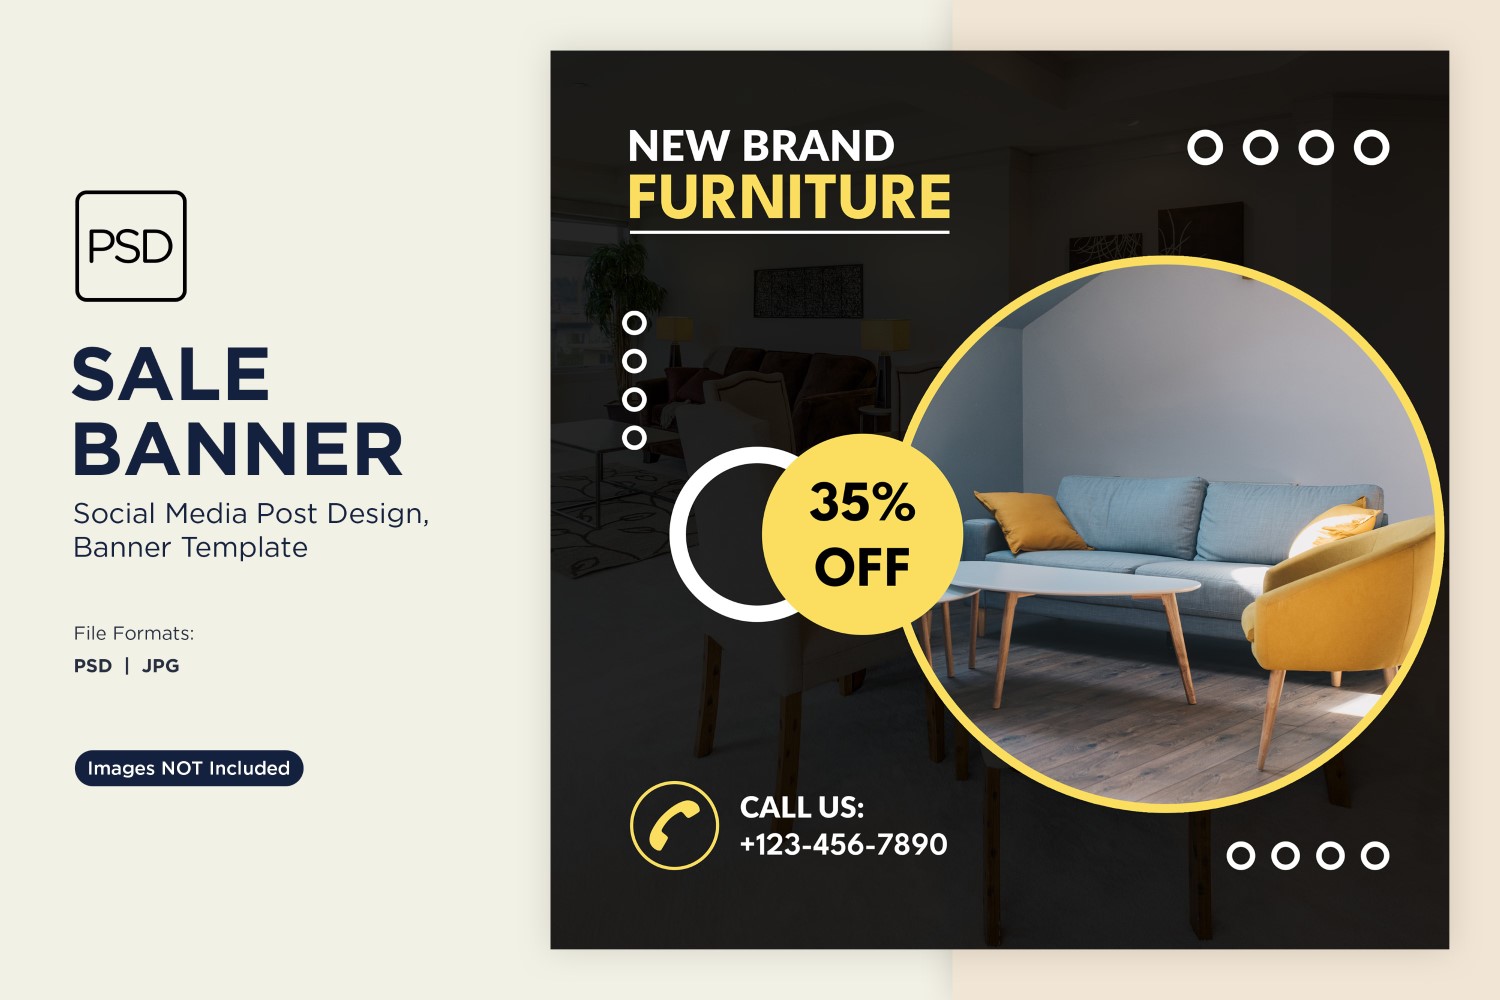 Special Sale on New Brand Furniture Banner Design Template